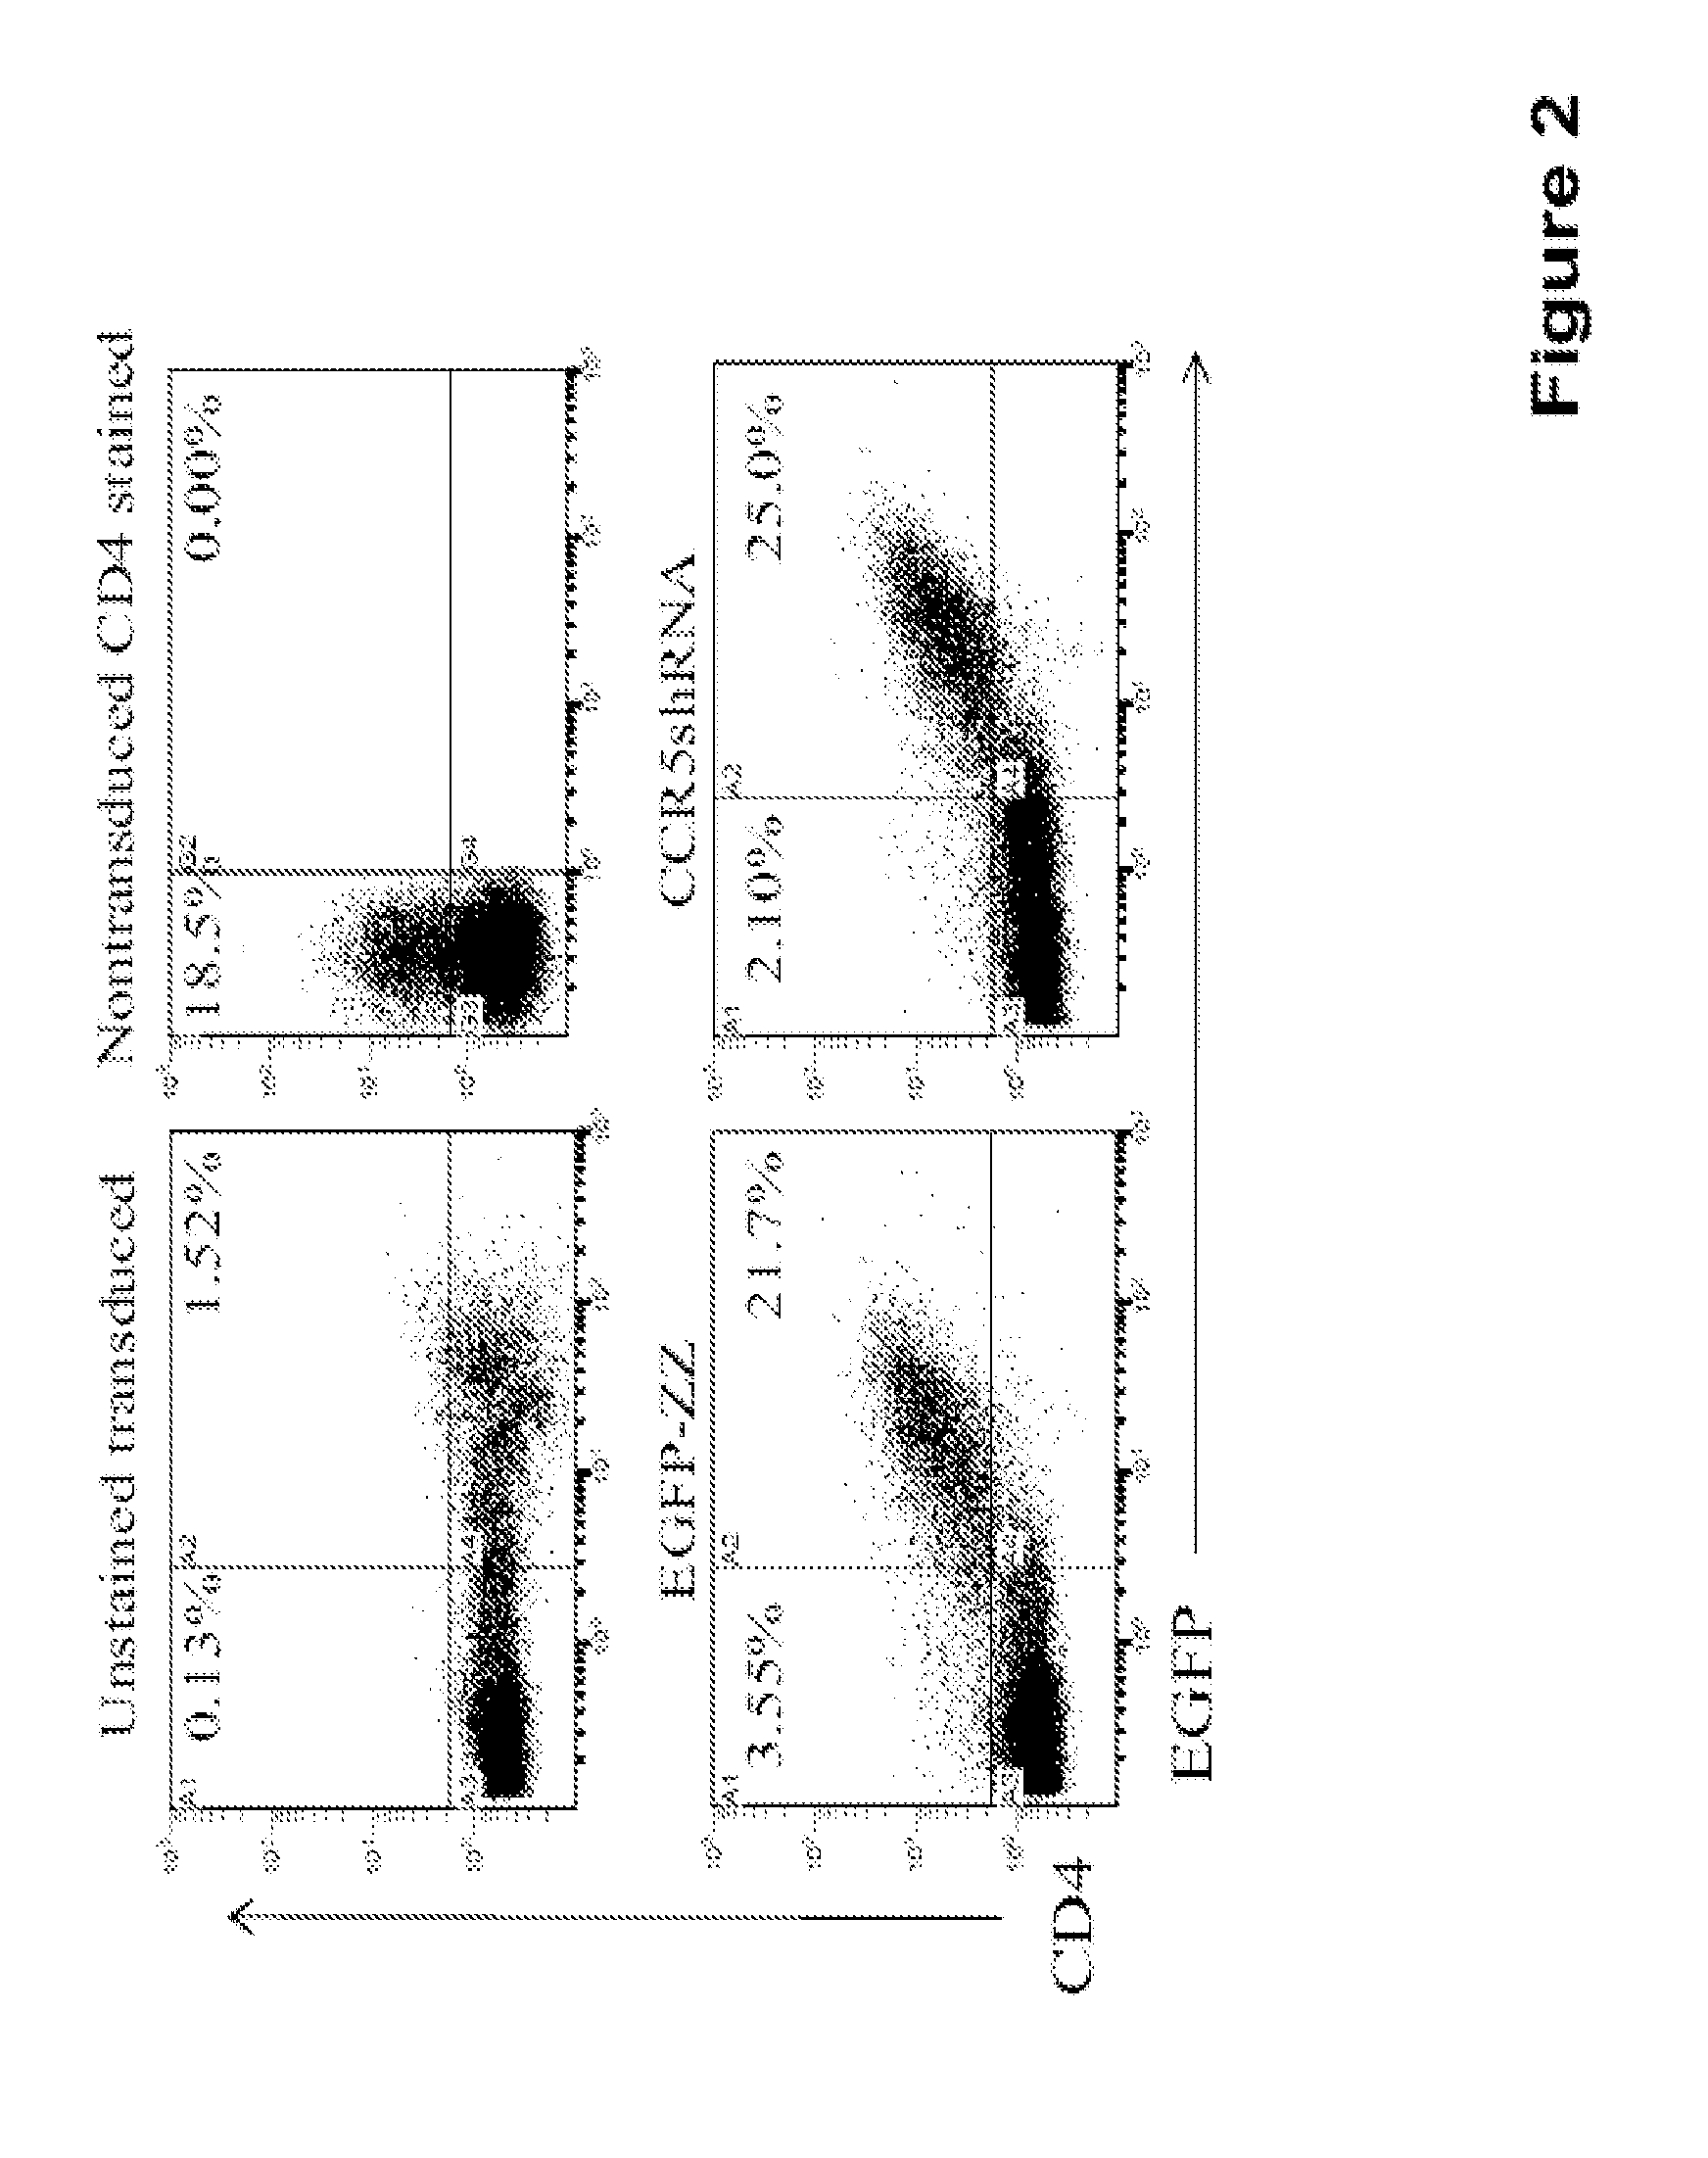 Combination Anti-hiv vectors, targeting vectors, and methods of use